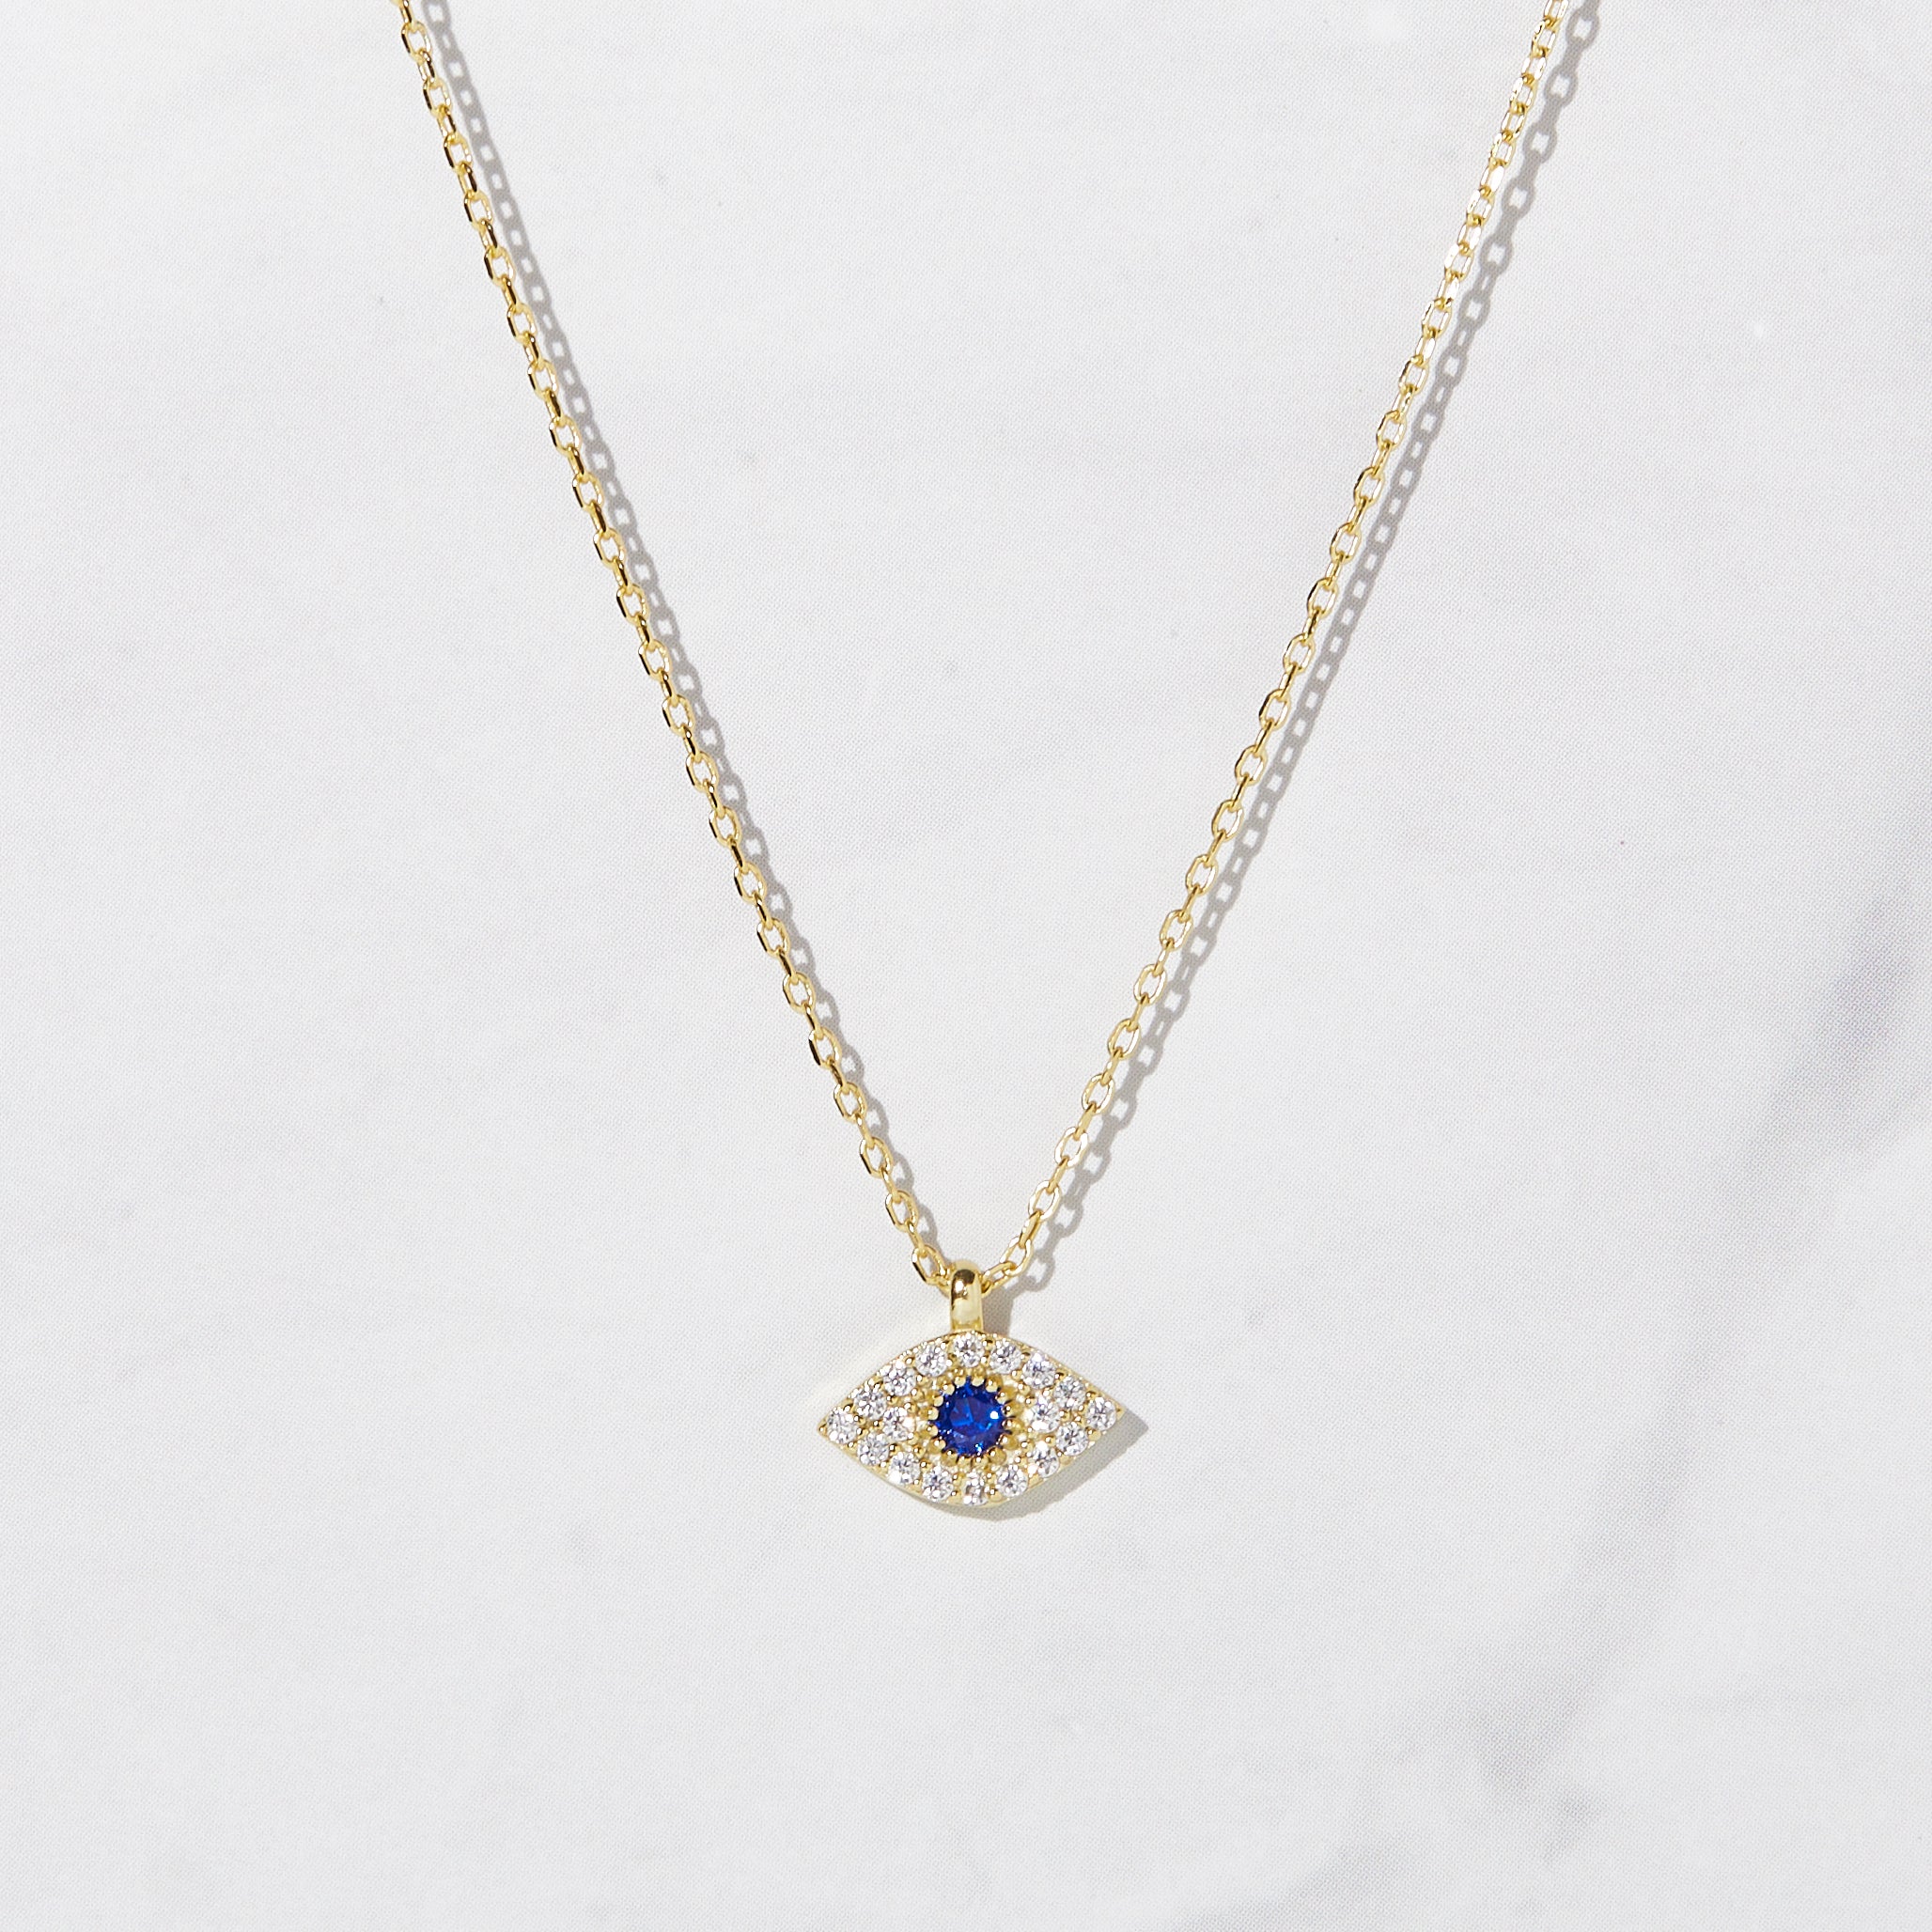 Blue sapphire evil eye necklace beautifully crafted in 18k gold. 🧿✨ |  Instagram